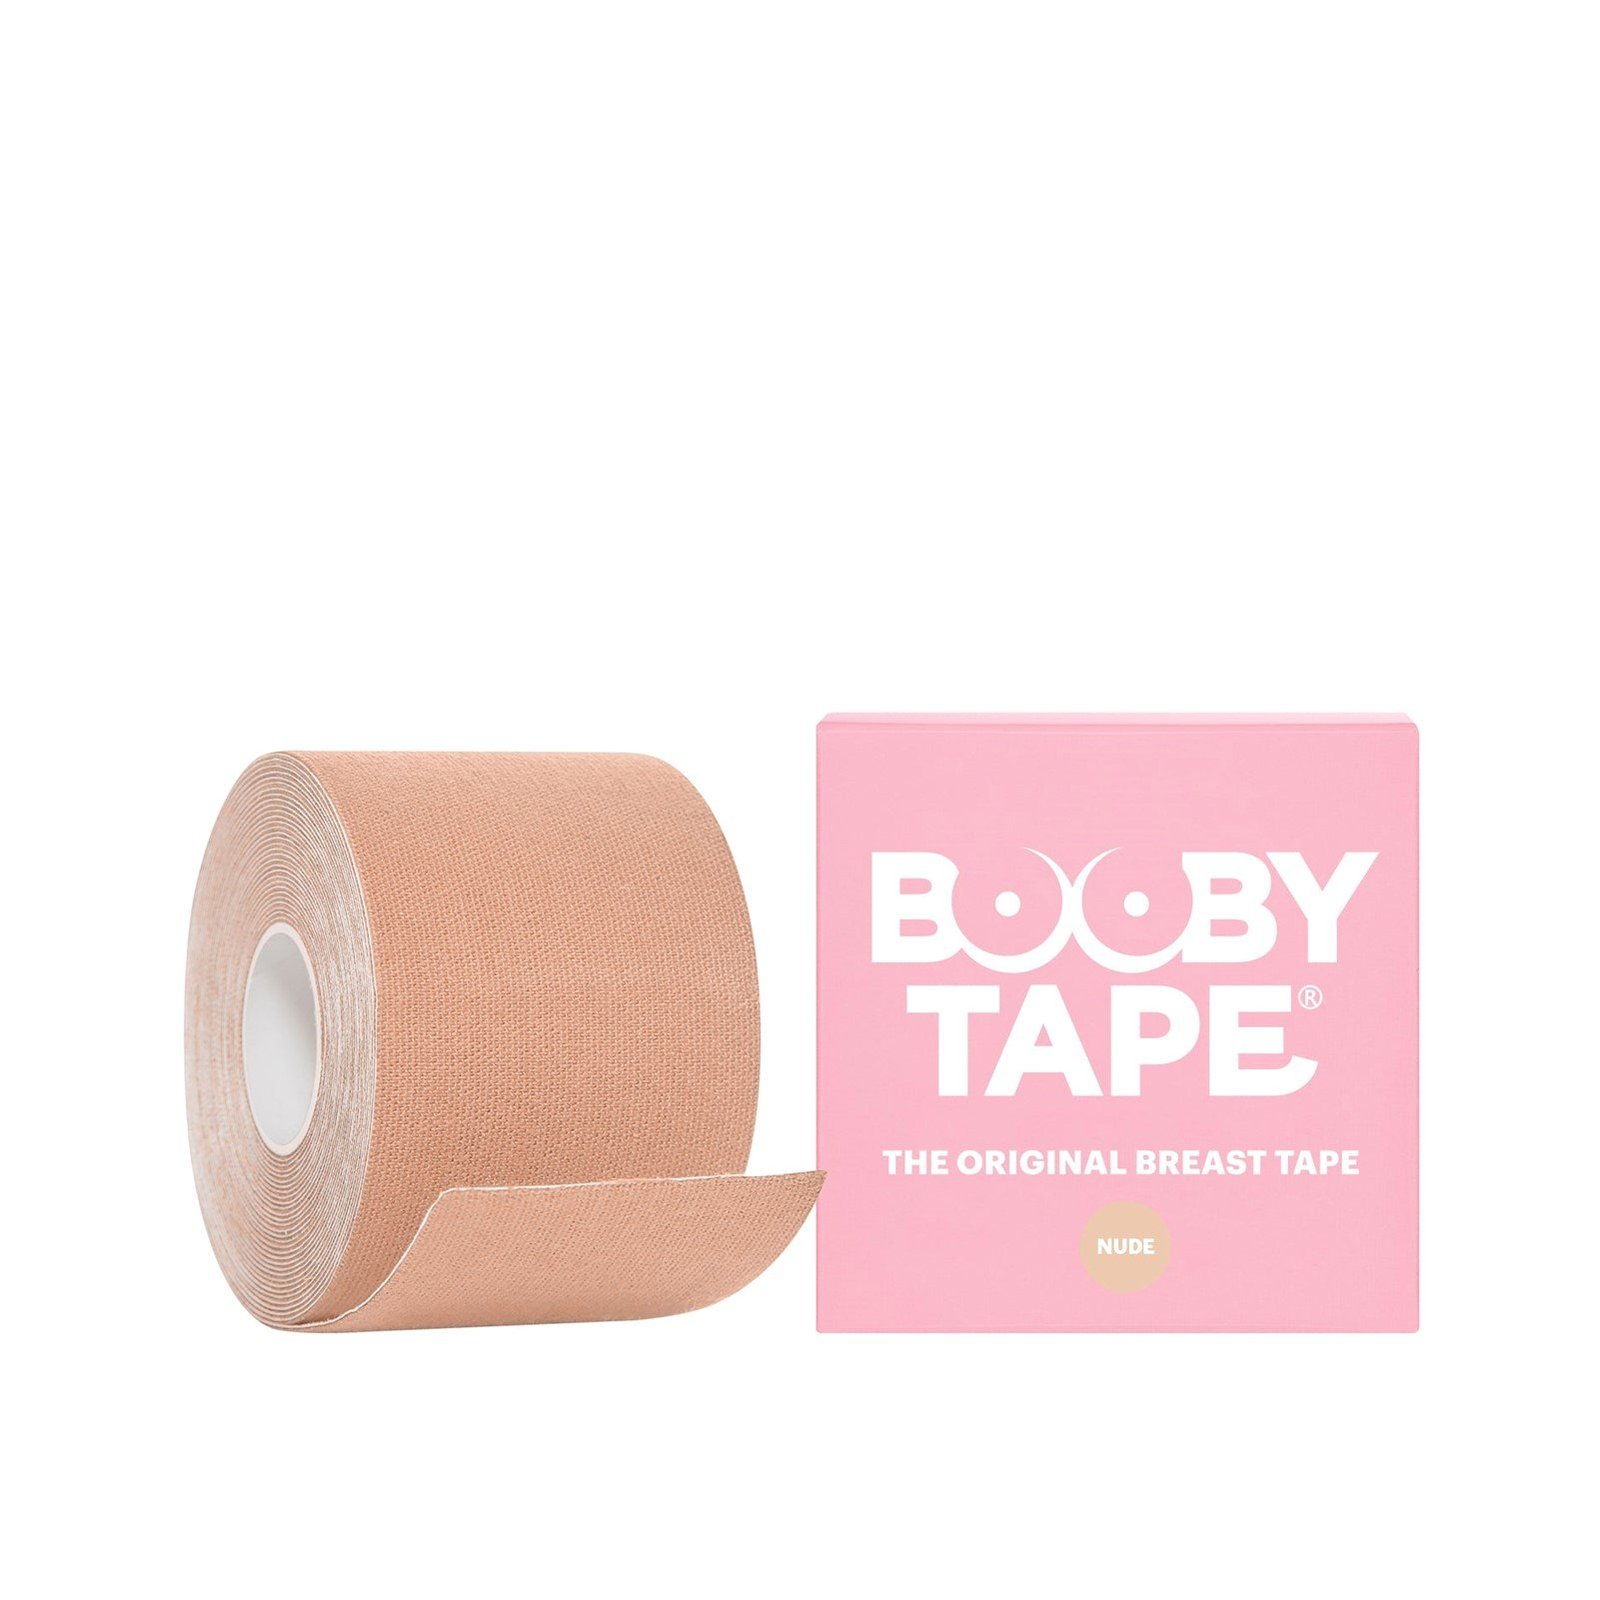 Buy Booby Tape - The Original Breast Tape Nude by Booby Tape at